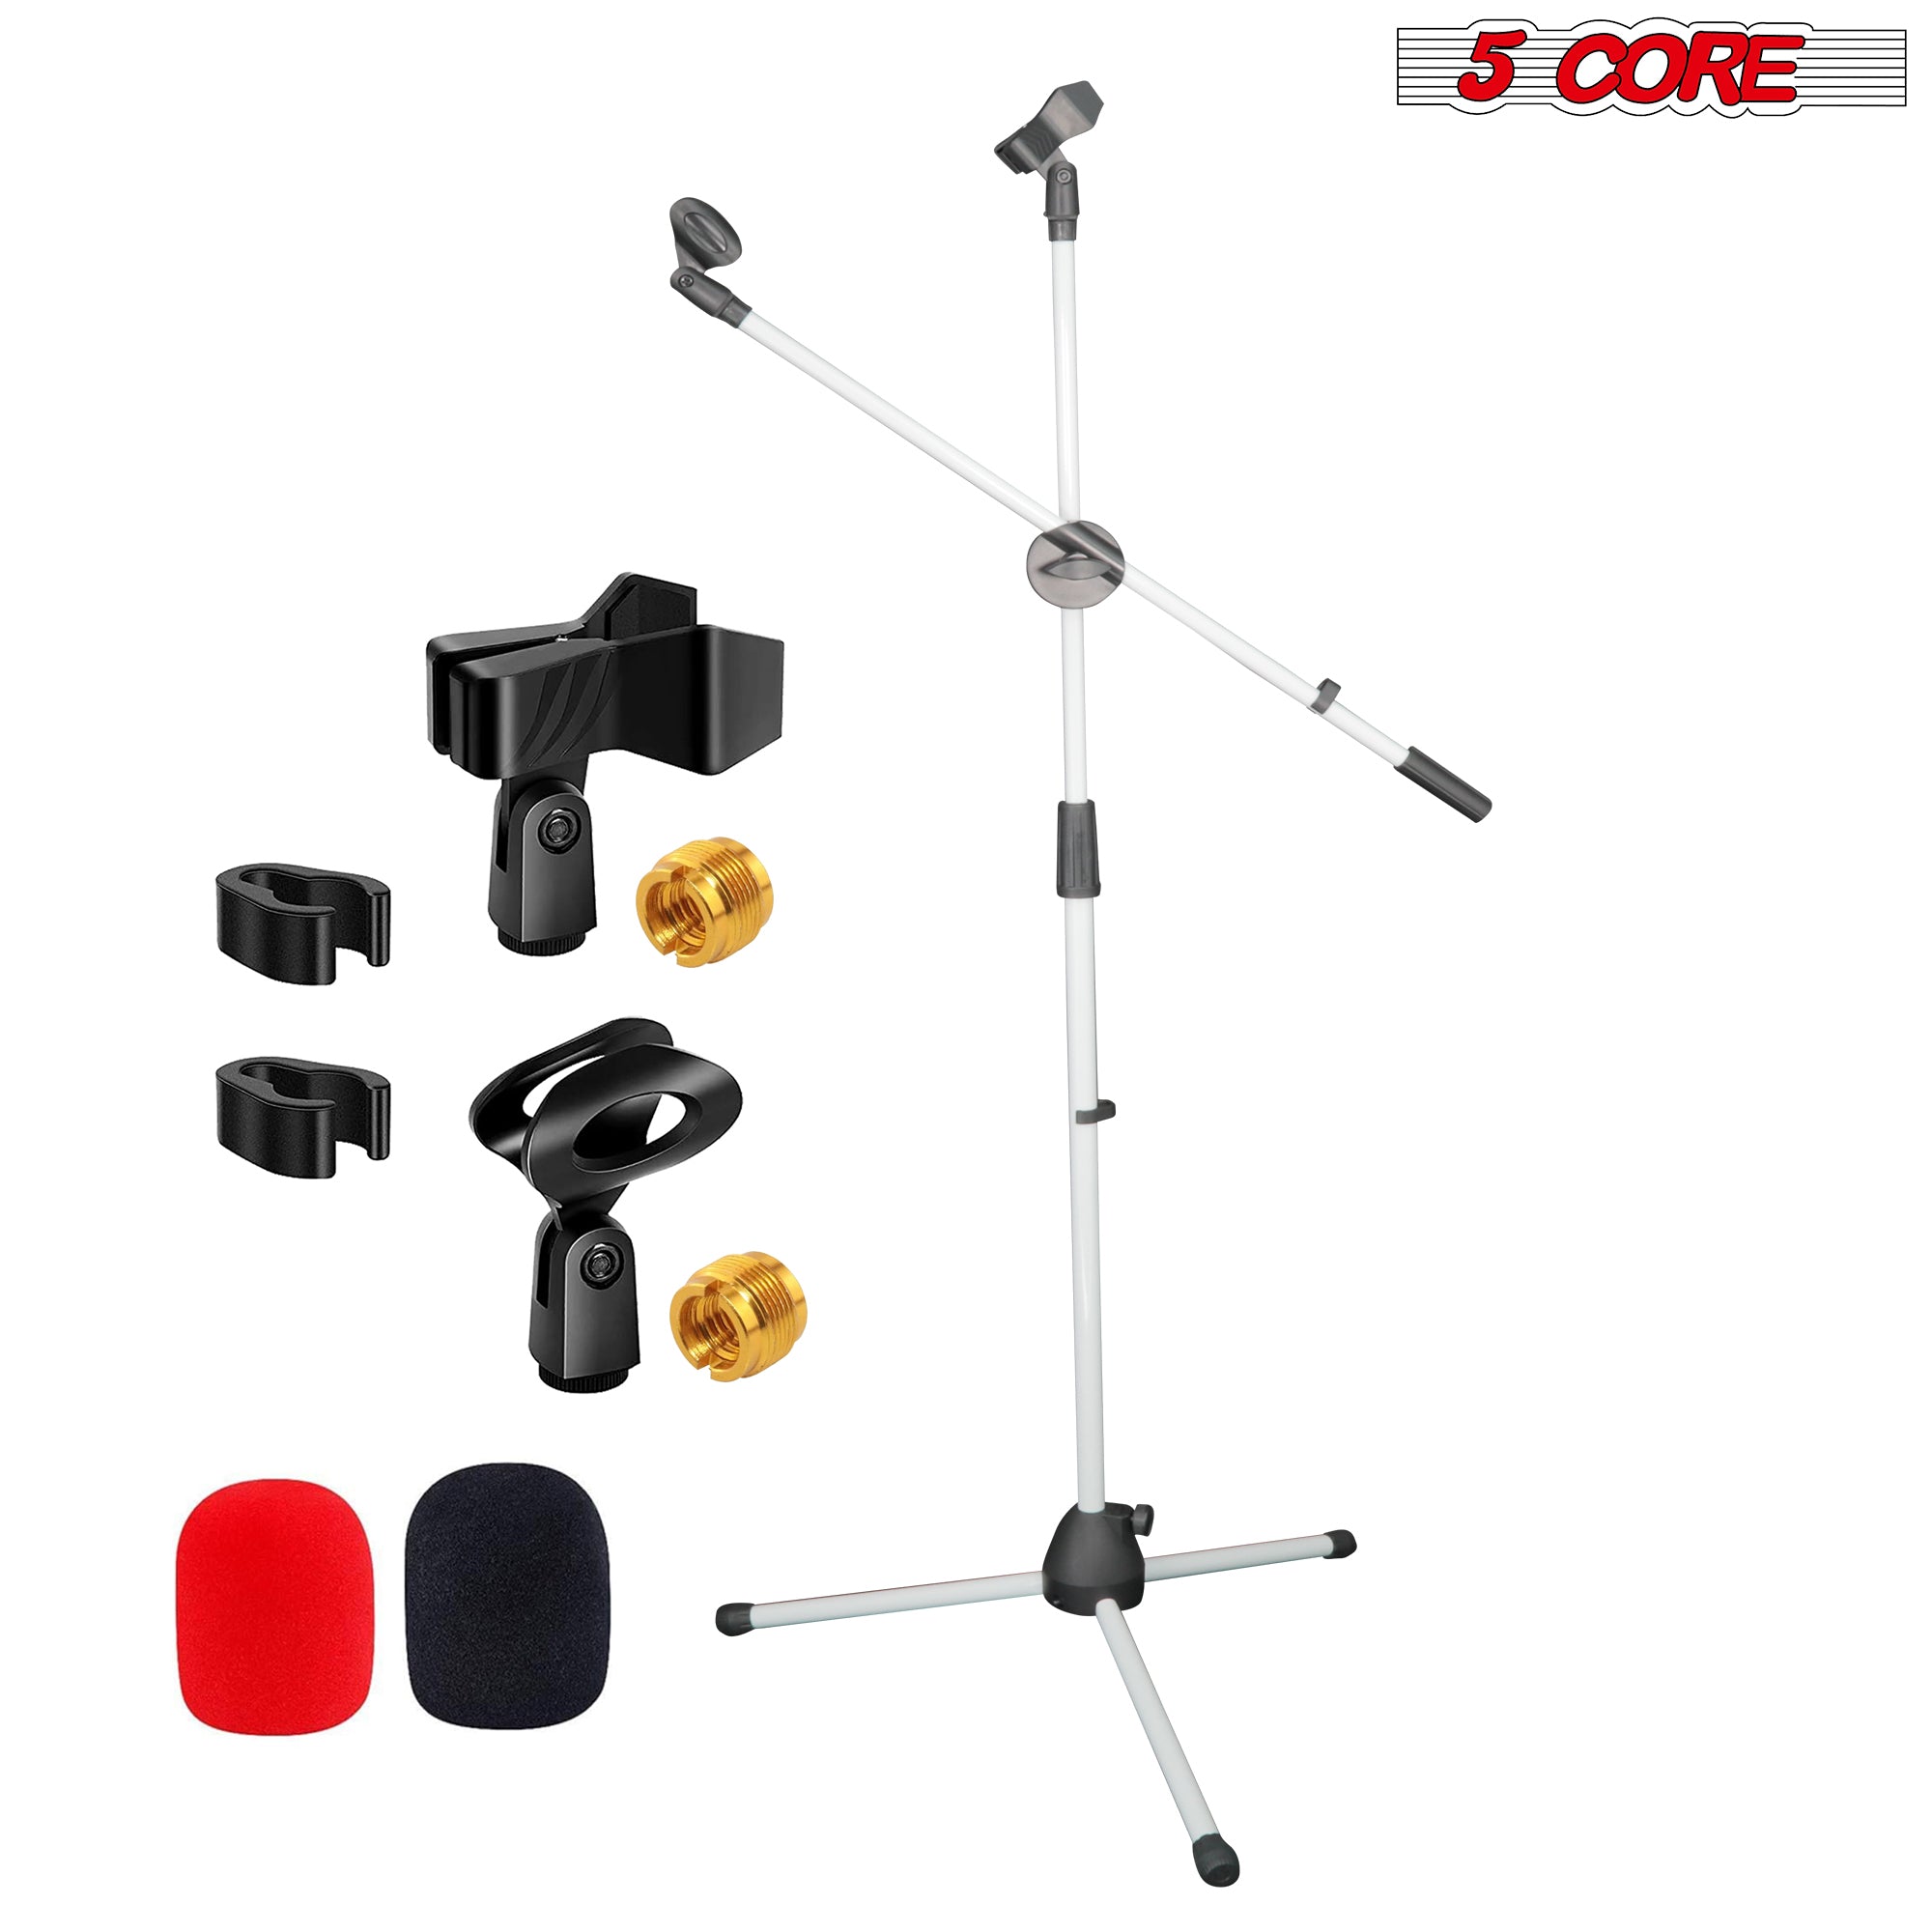 5 Core Mic Stand Height Adjustable 15.35 to 21.25" Short Desktop Stands w Telescopic Boom Arm and Round Base Low Profile Small Mic Holder Ideal for Desk Recording and Streaming White 1Pc - MSSB W